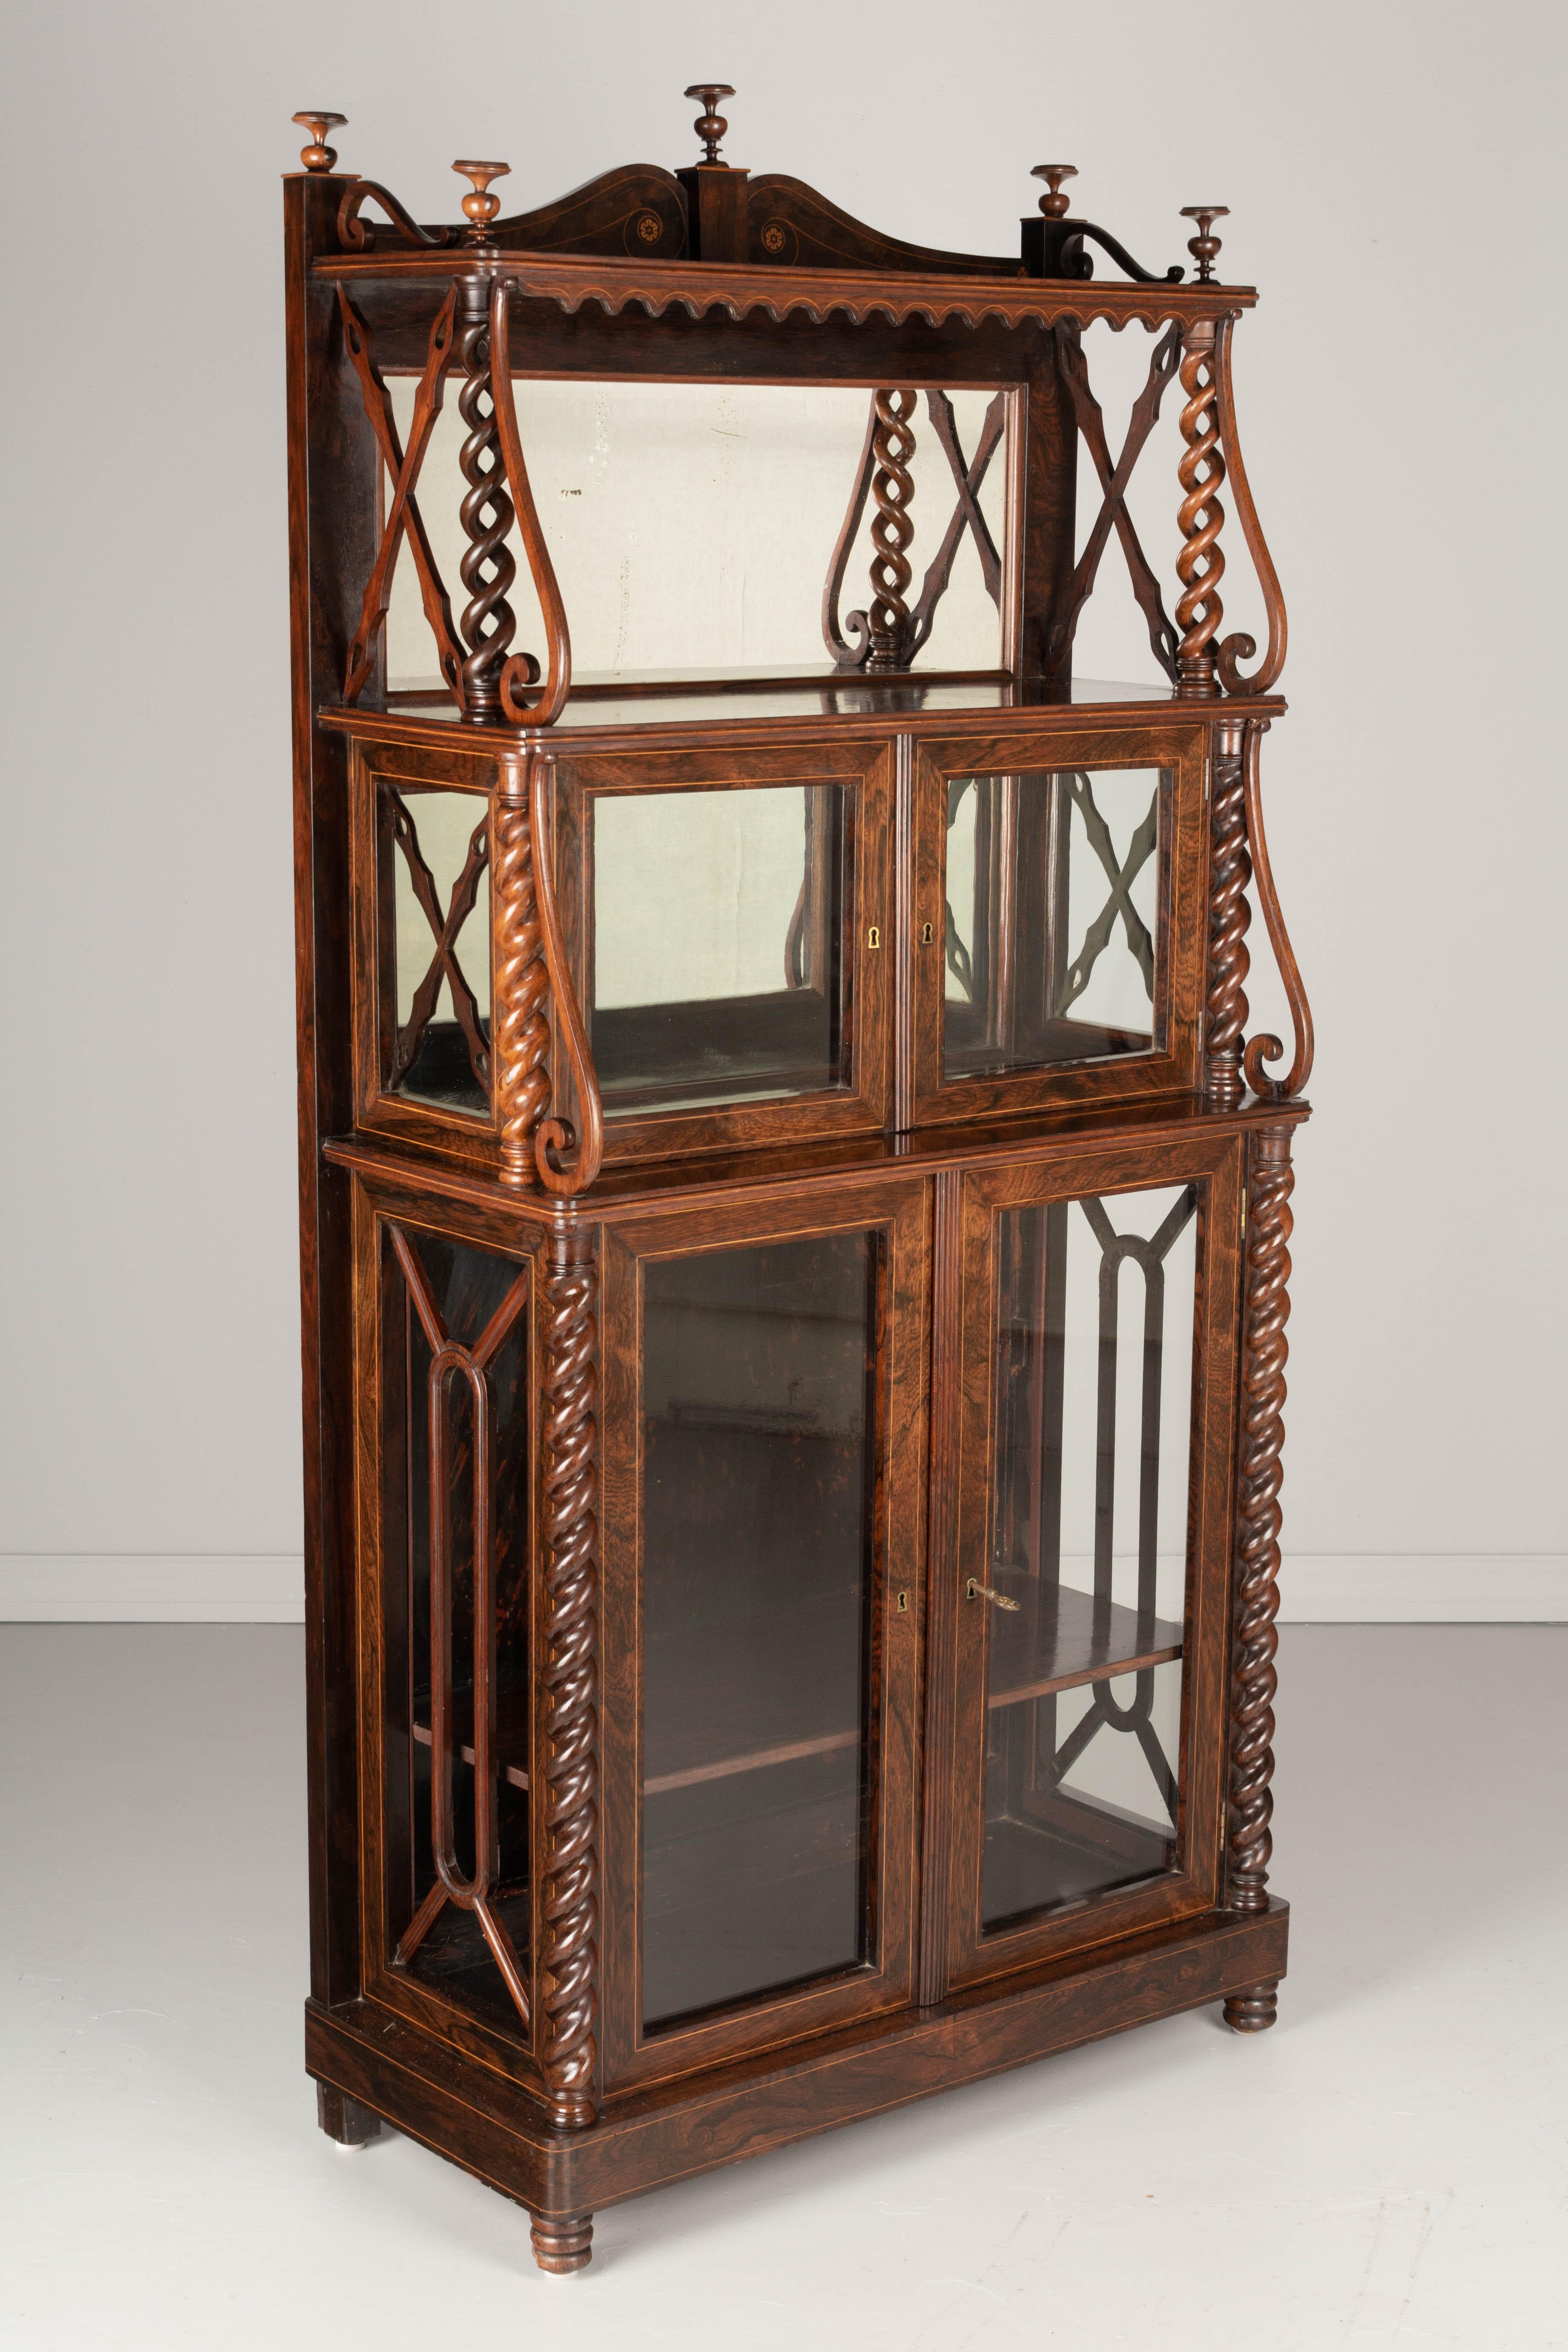 A 19th Century French Louis Philippe étagère, or display cabinet with shelves. Made of solid rosewood with fine lemon wood marquetry inlay borders and rosettes. Good quality craftsmanship with carved barley twist columns and delicate turned finials.